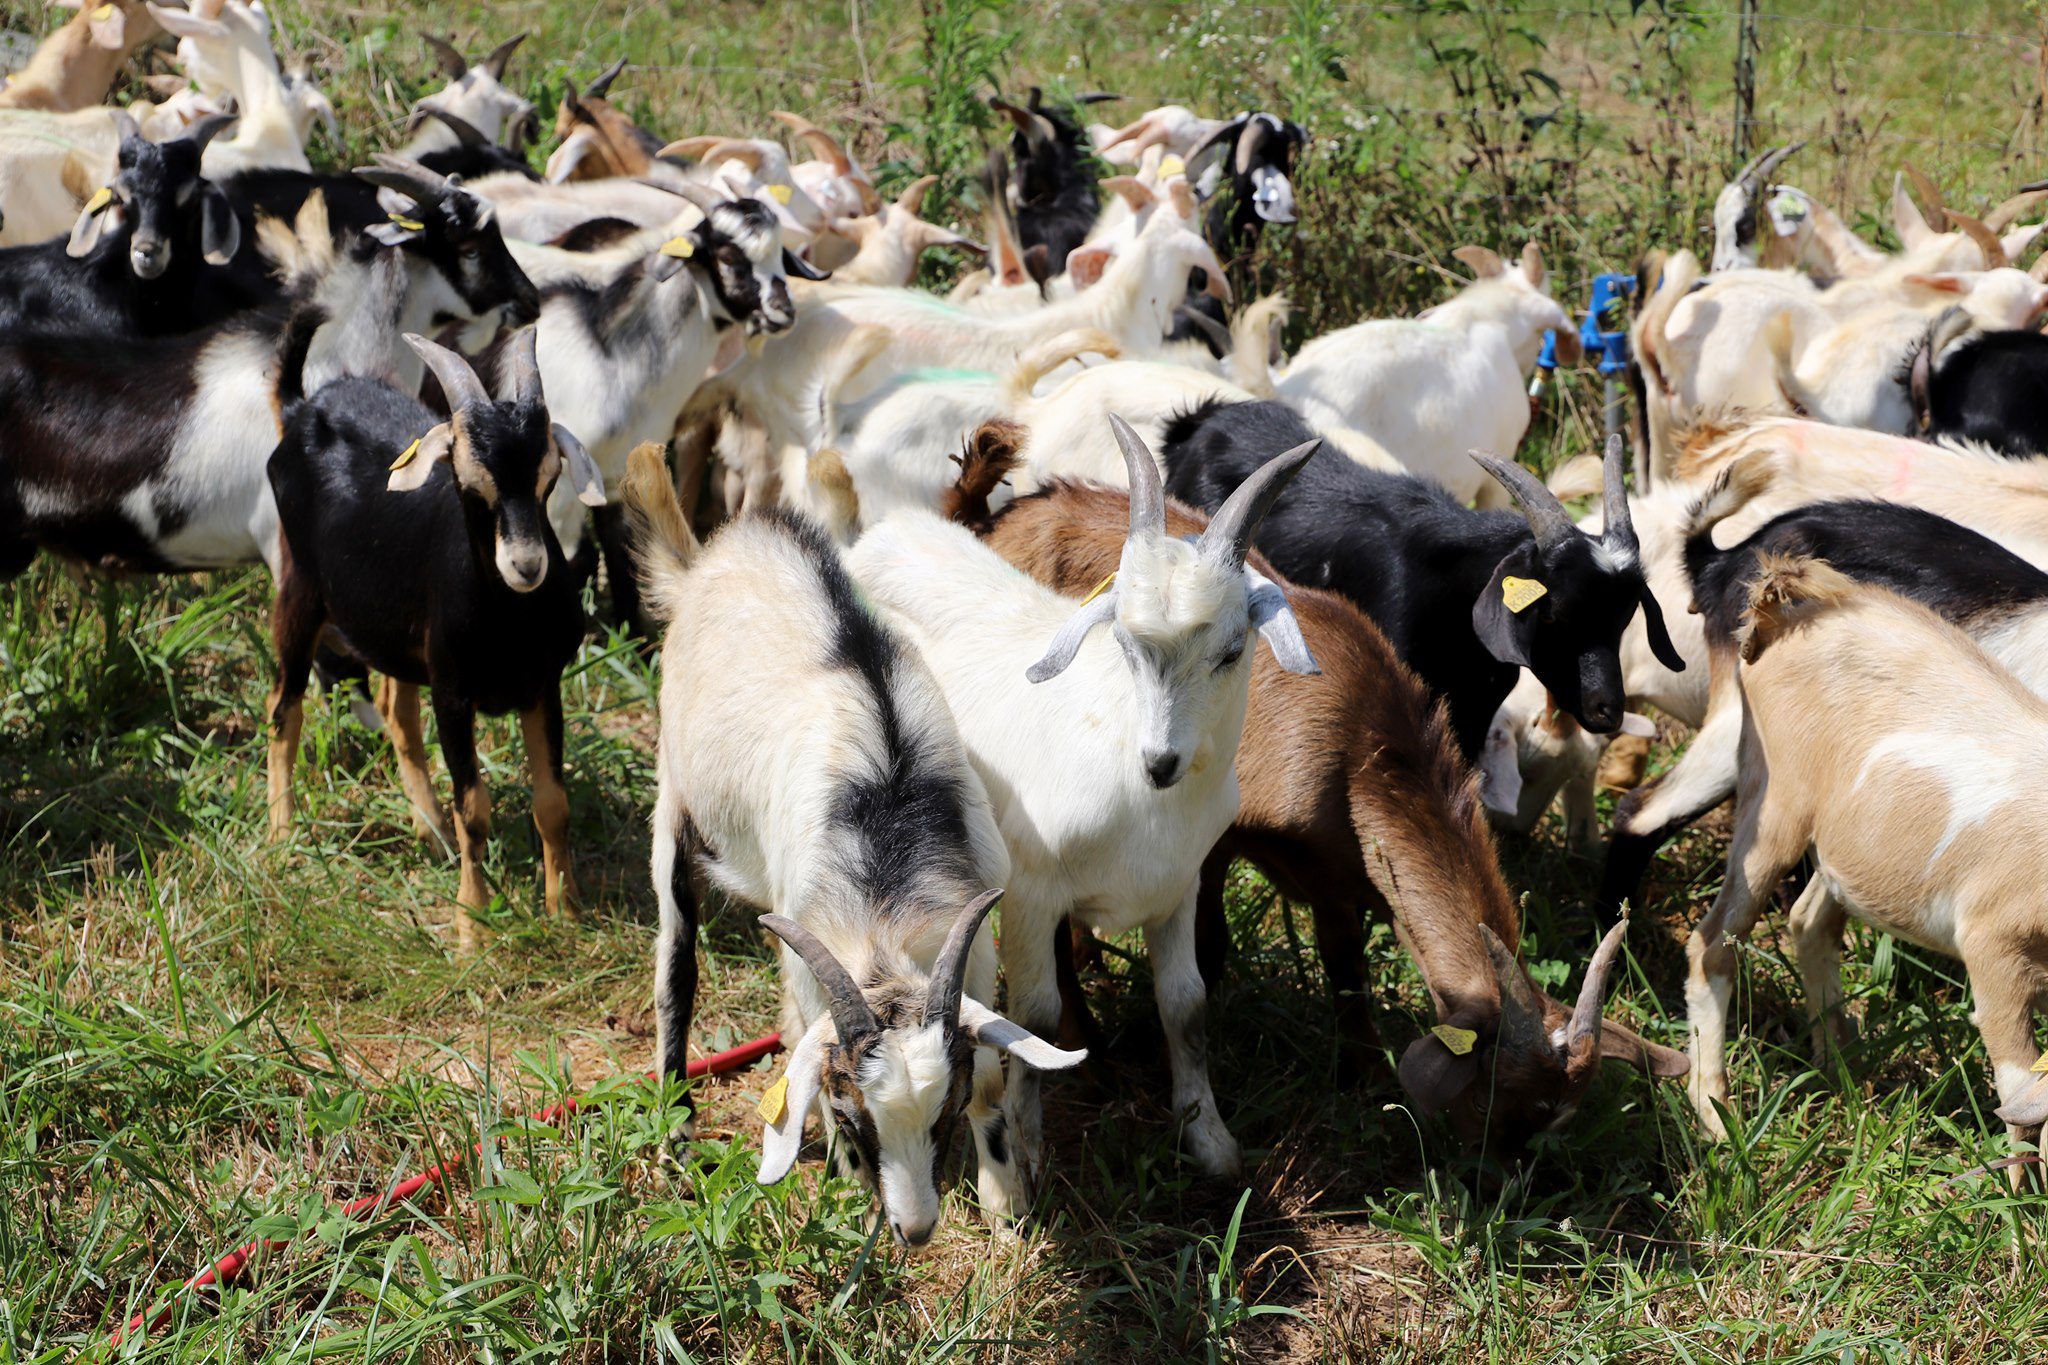 A heard of goats in a pasture.